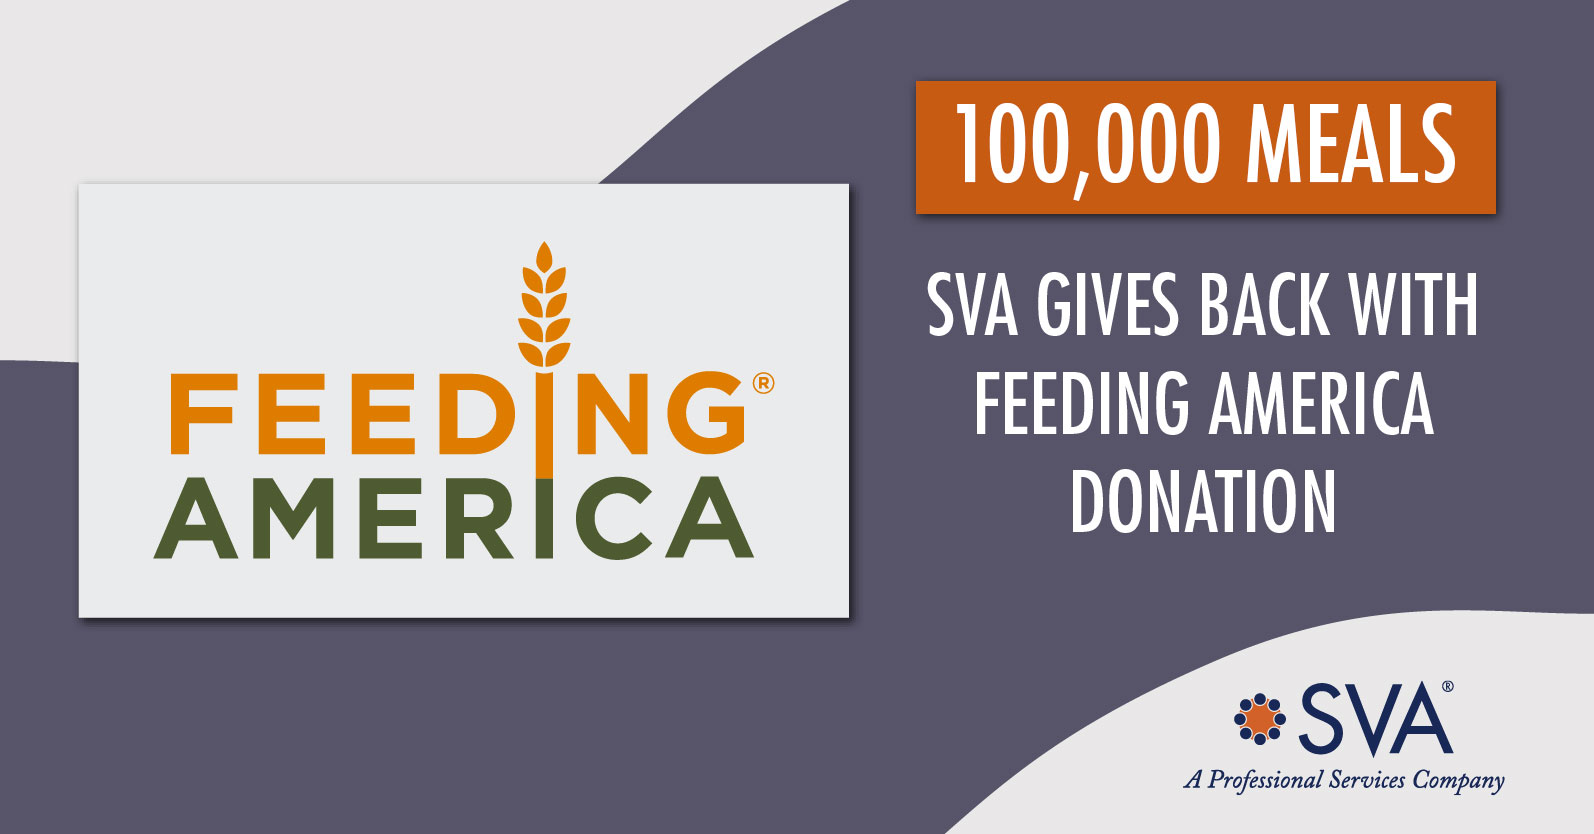 SVA Gives Back with Feeding America Donation